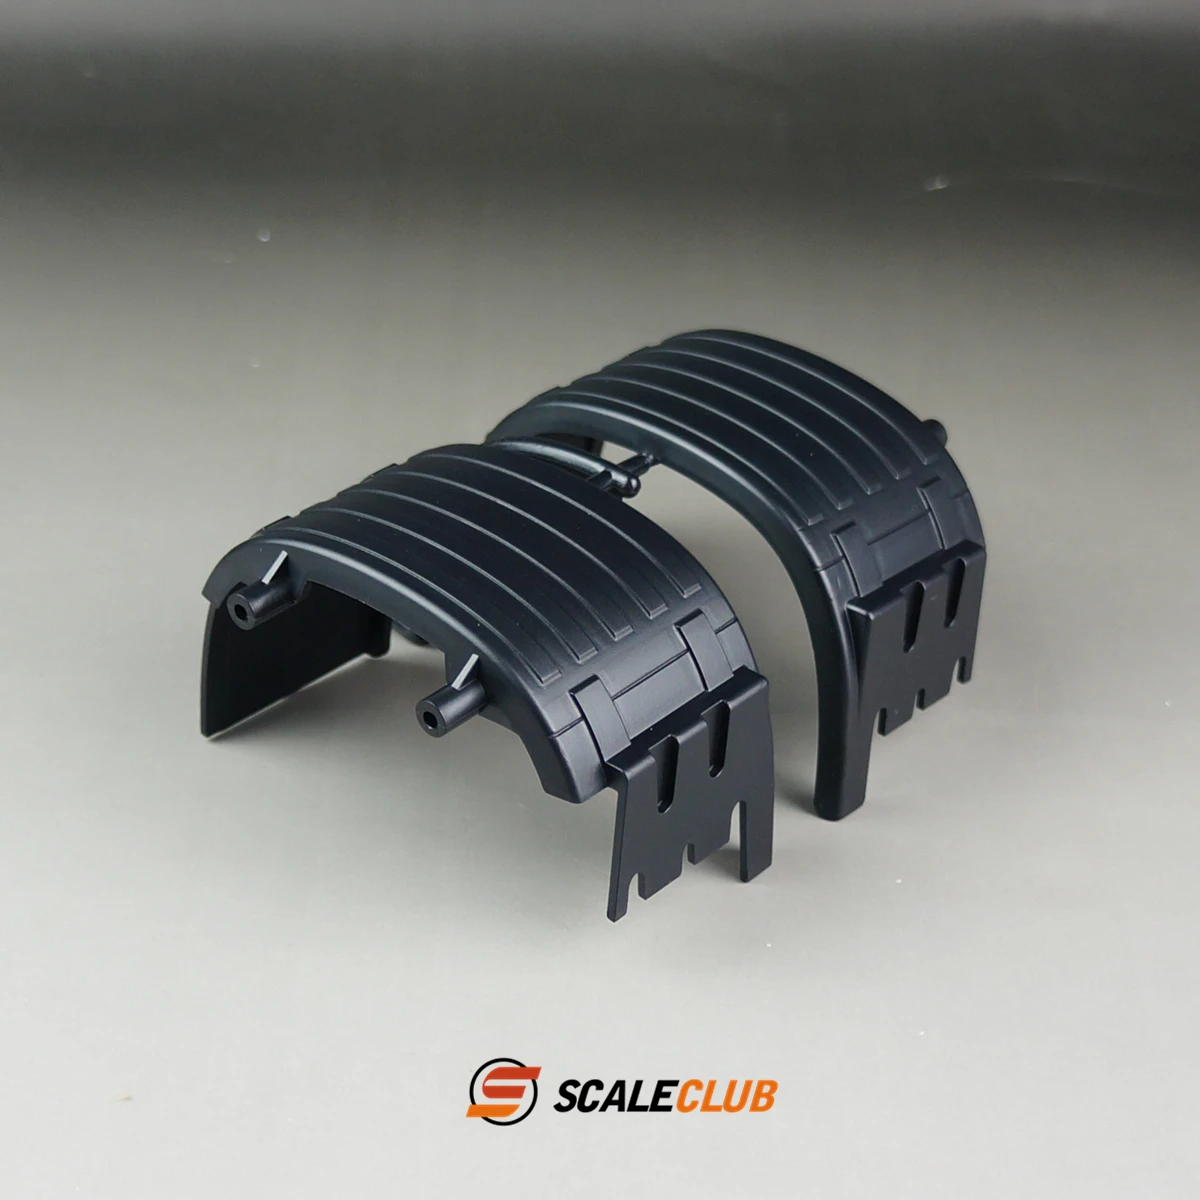 

Scaleclub 1/14 Universal Single Axle Fender Truck Model For Tamiya Lesu For Scania Man Actros Volvo Car Parts Rc Truck Trailer